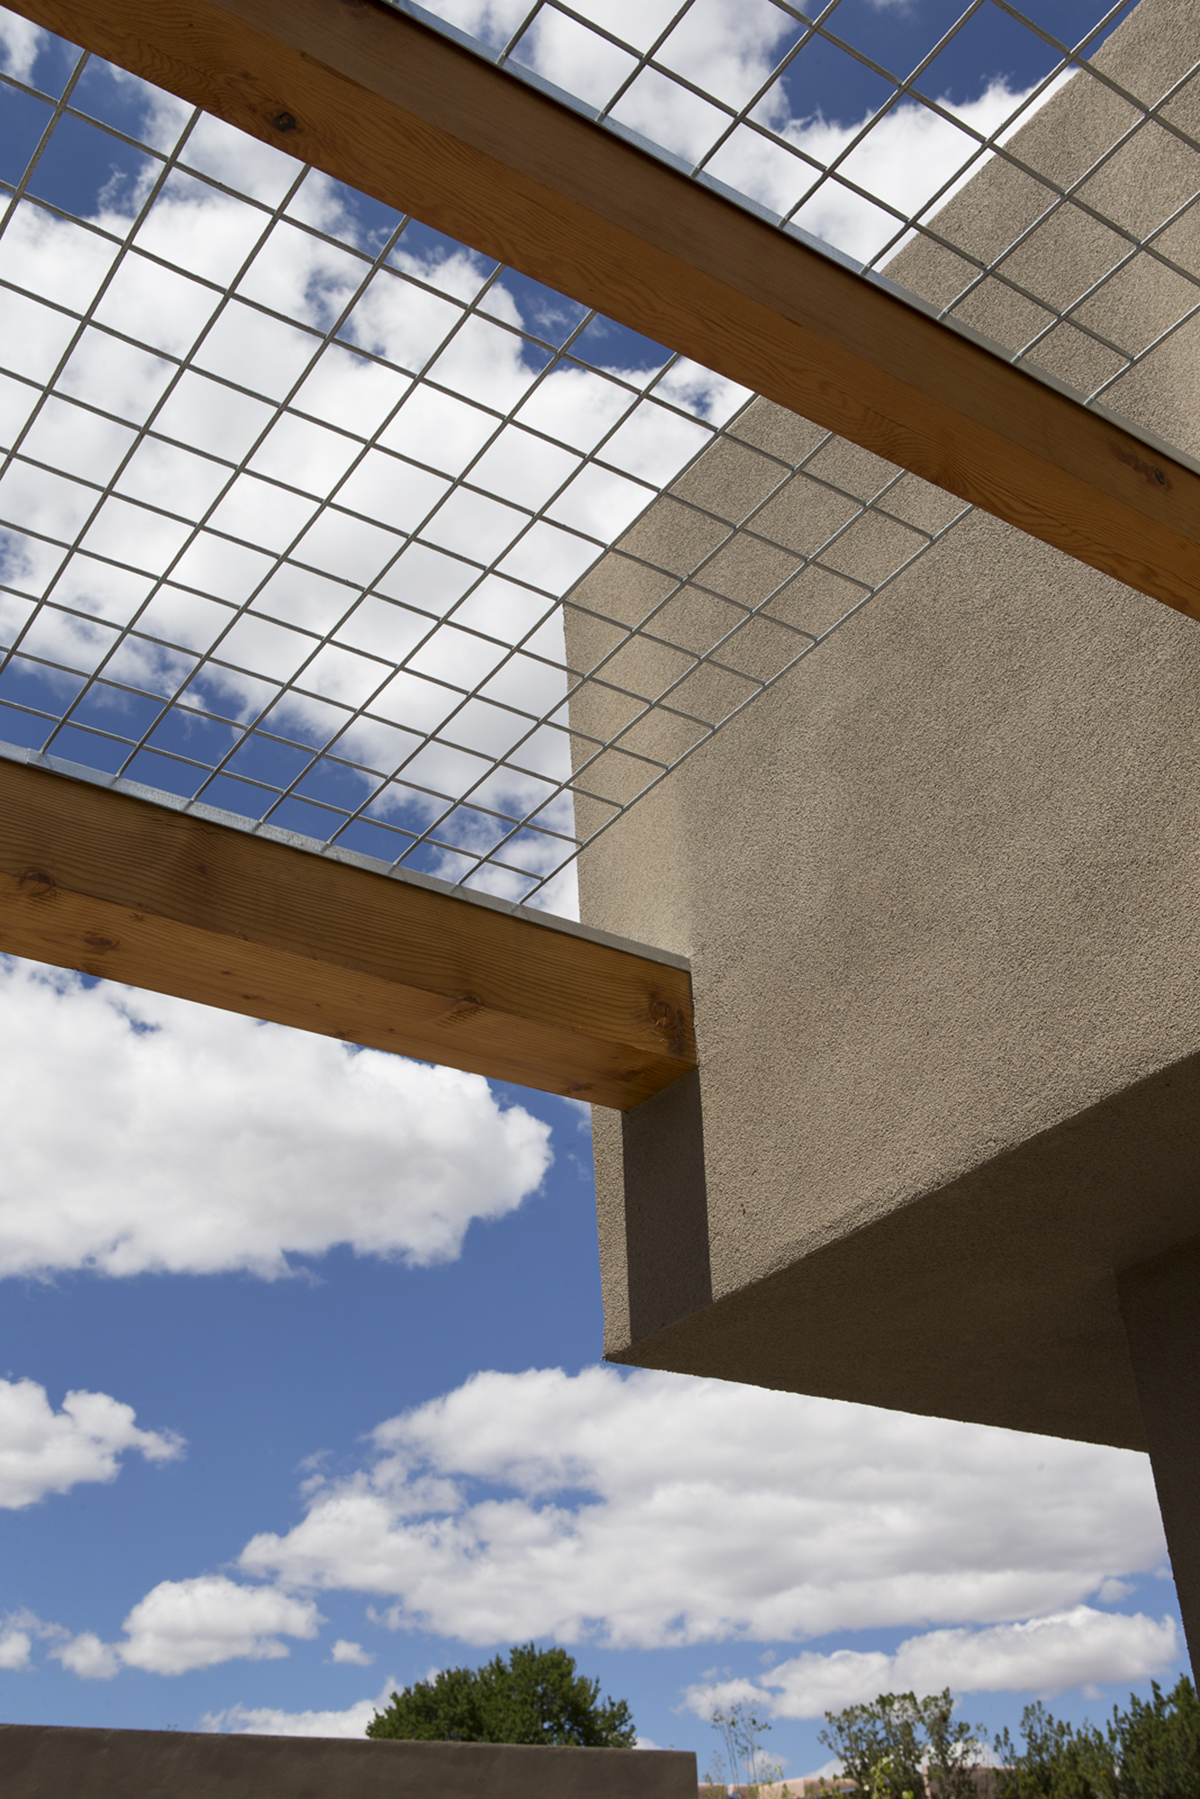 A blue sky with white clouds, perfect for an architect's vision.